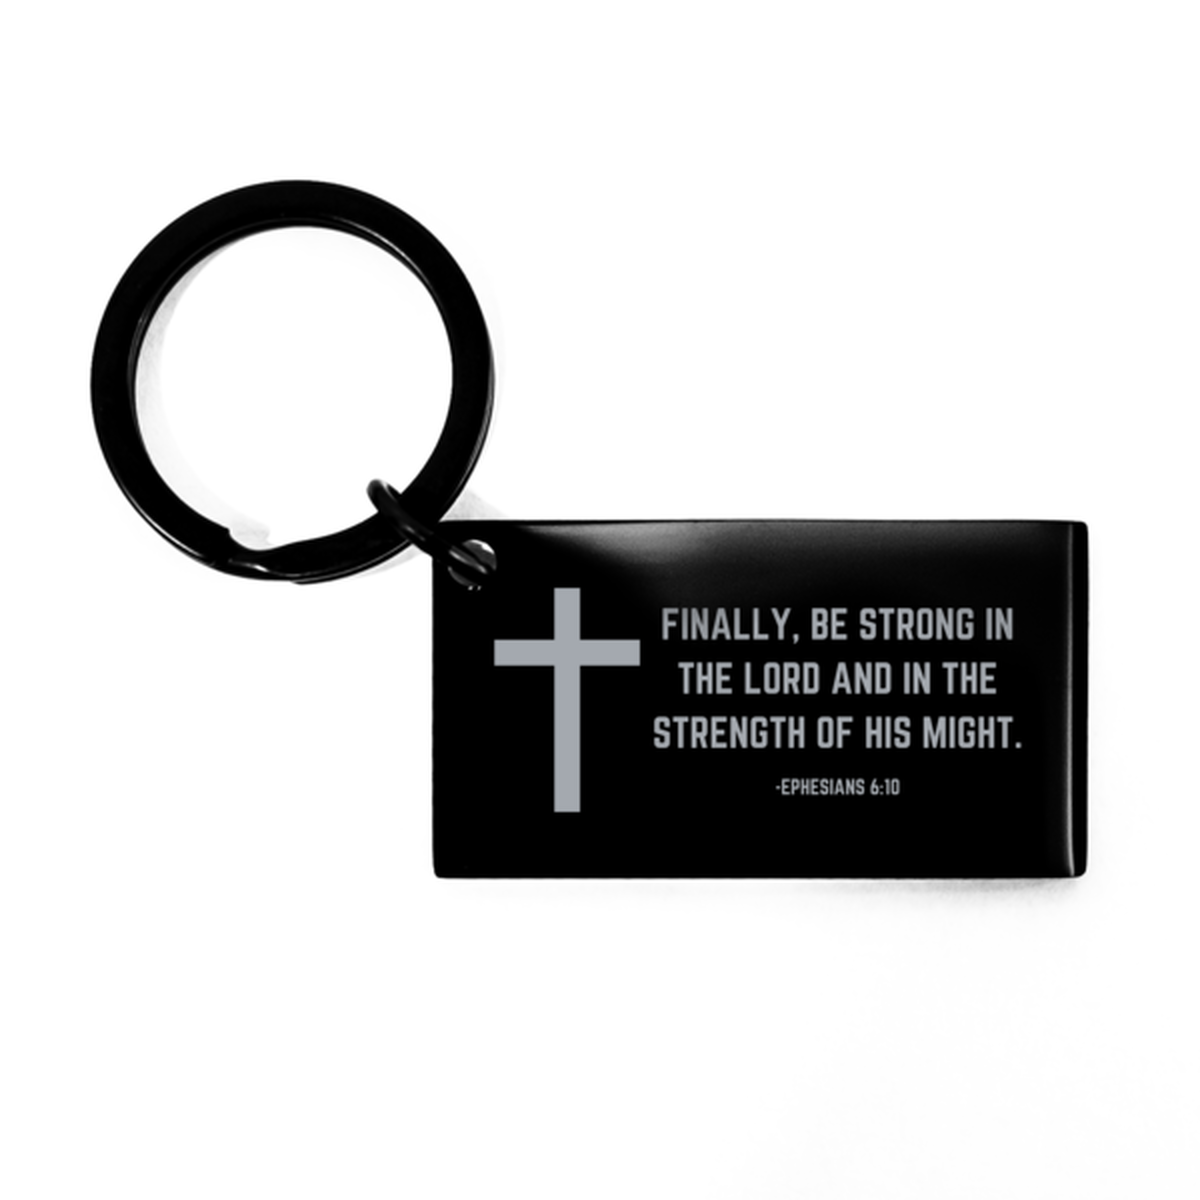 Baptism Gifts For Teenage Boys Girls, Christian Bible Verse Black Keychain, Finally, be strong in the Lord Confirmation Gifts, Bible Verse Keyring for Son, Godson, Grandson, Nephew